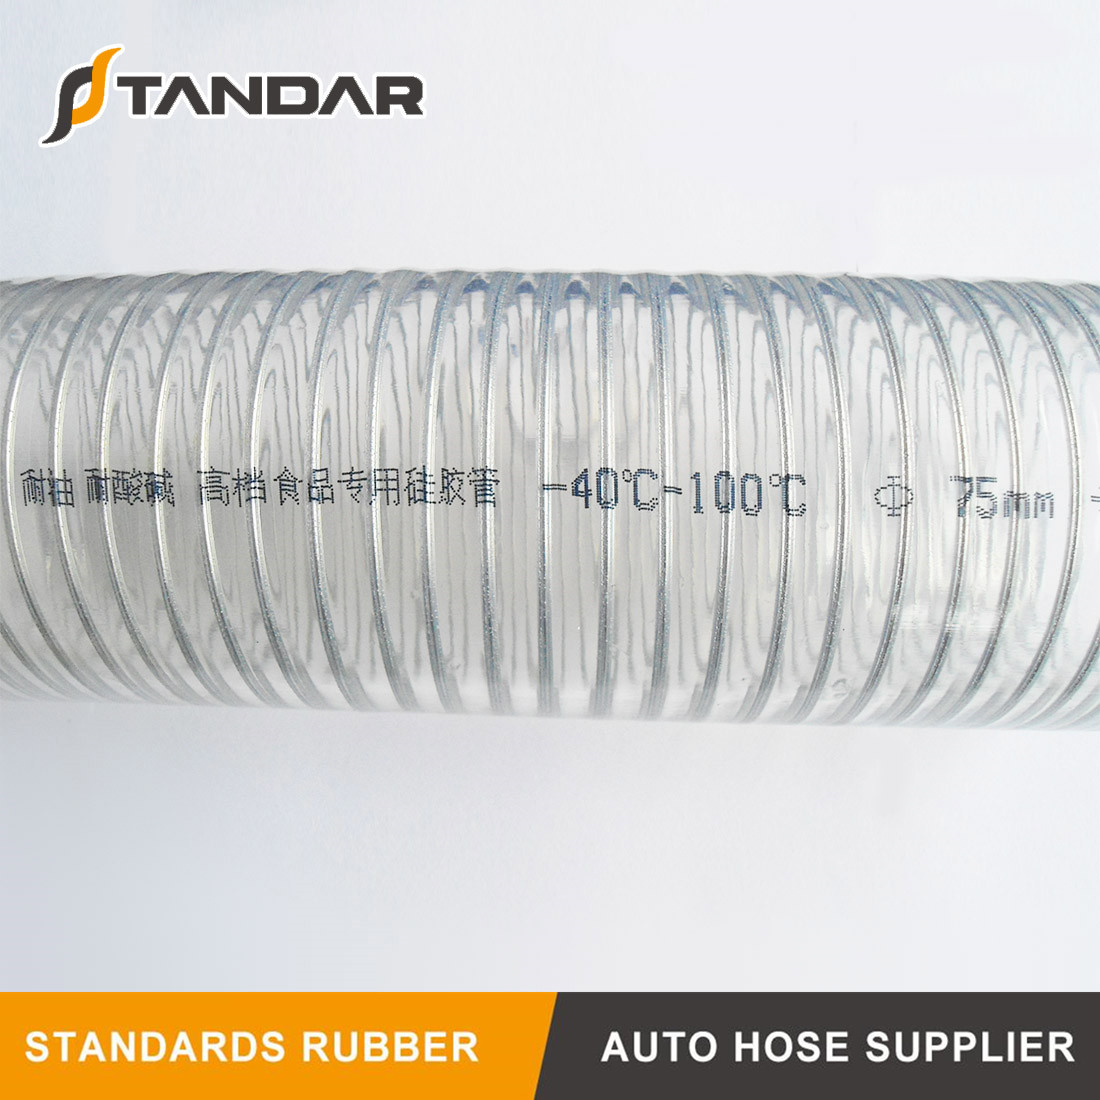 What is the difference between high temperature resistant silicone hose and high temperature resistant rubber hose